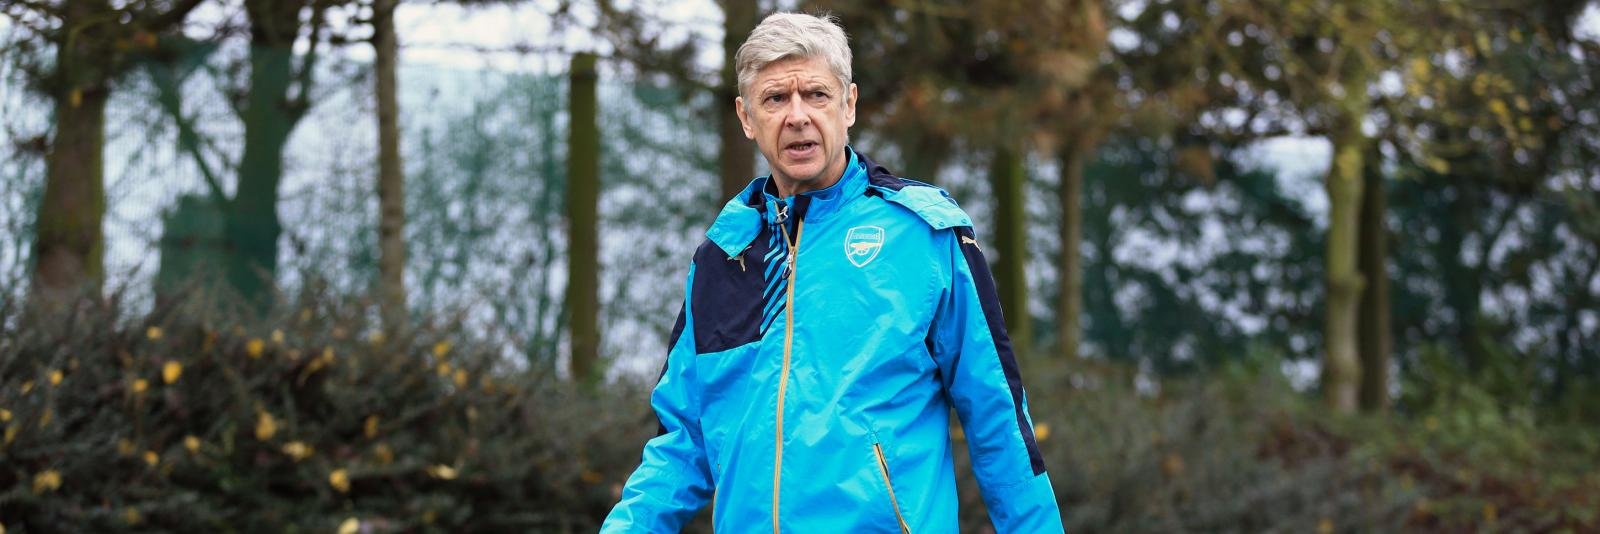 Arsenal eager to land 21-year-old Real Madrid prospect